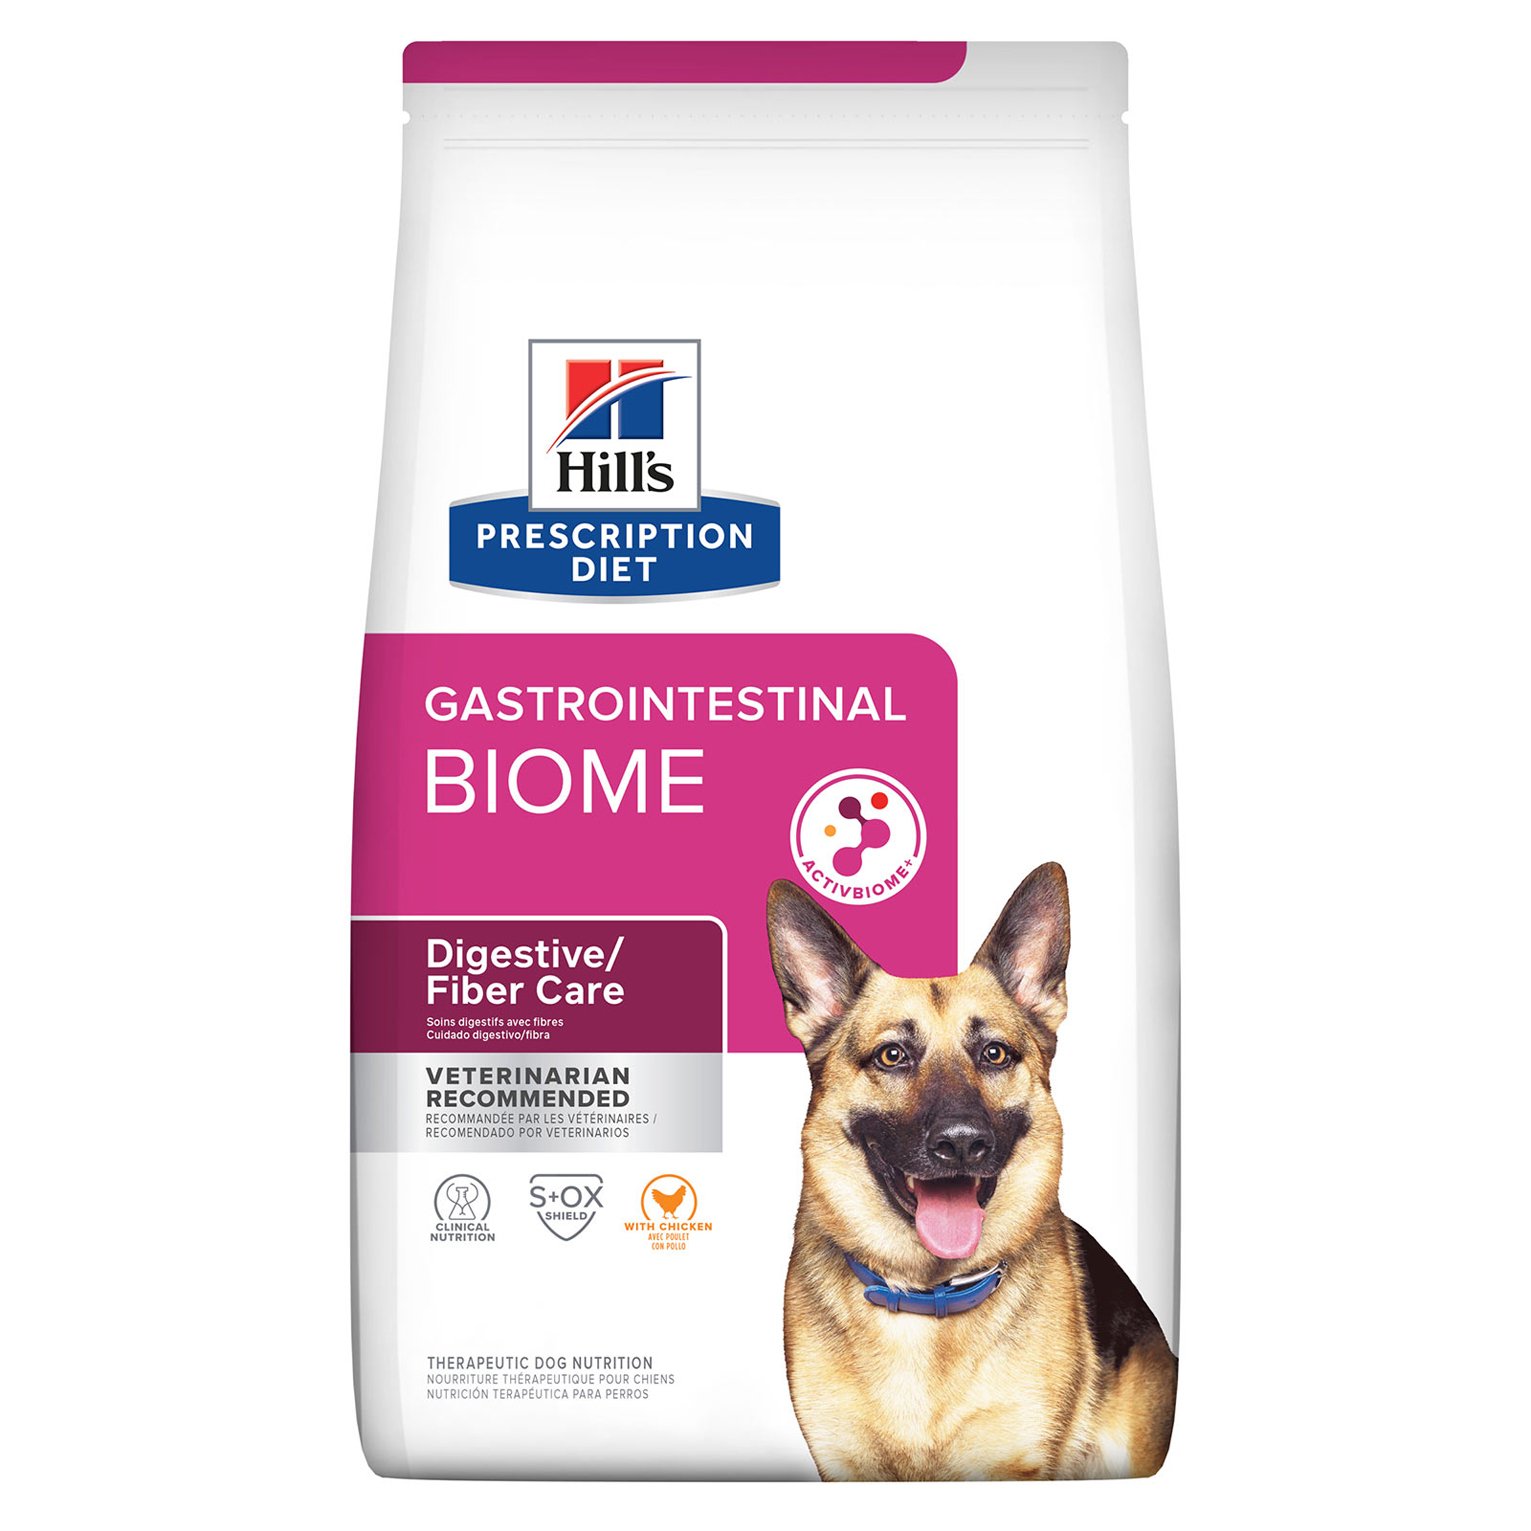 Hill's Prescription Diet Gastrointestinal Biome Digestive Fibre Care with Chicken Dry Dog Food